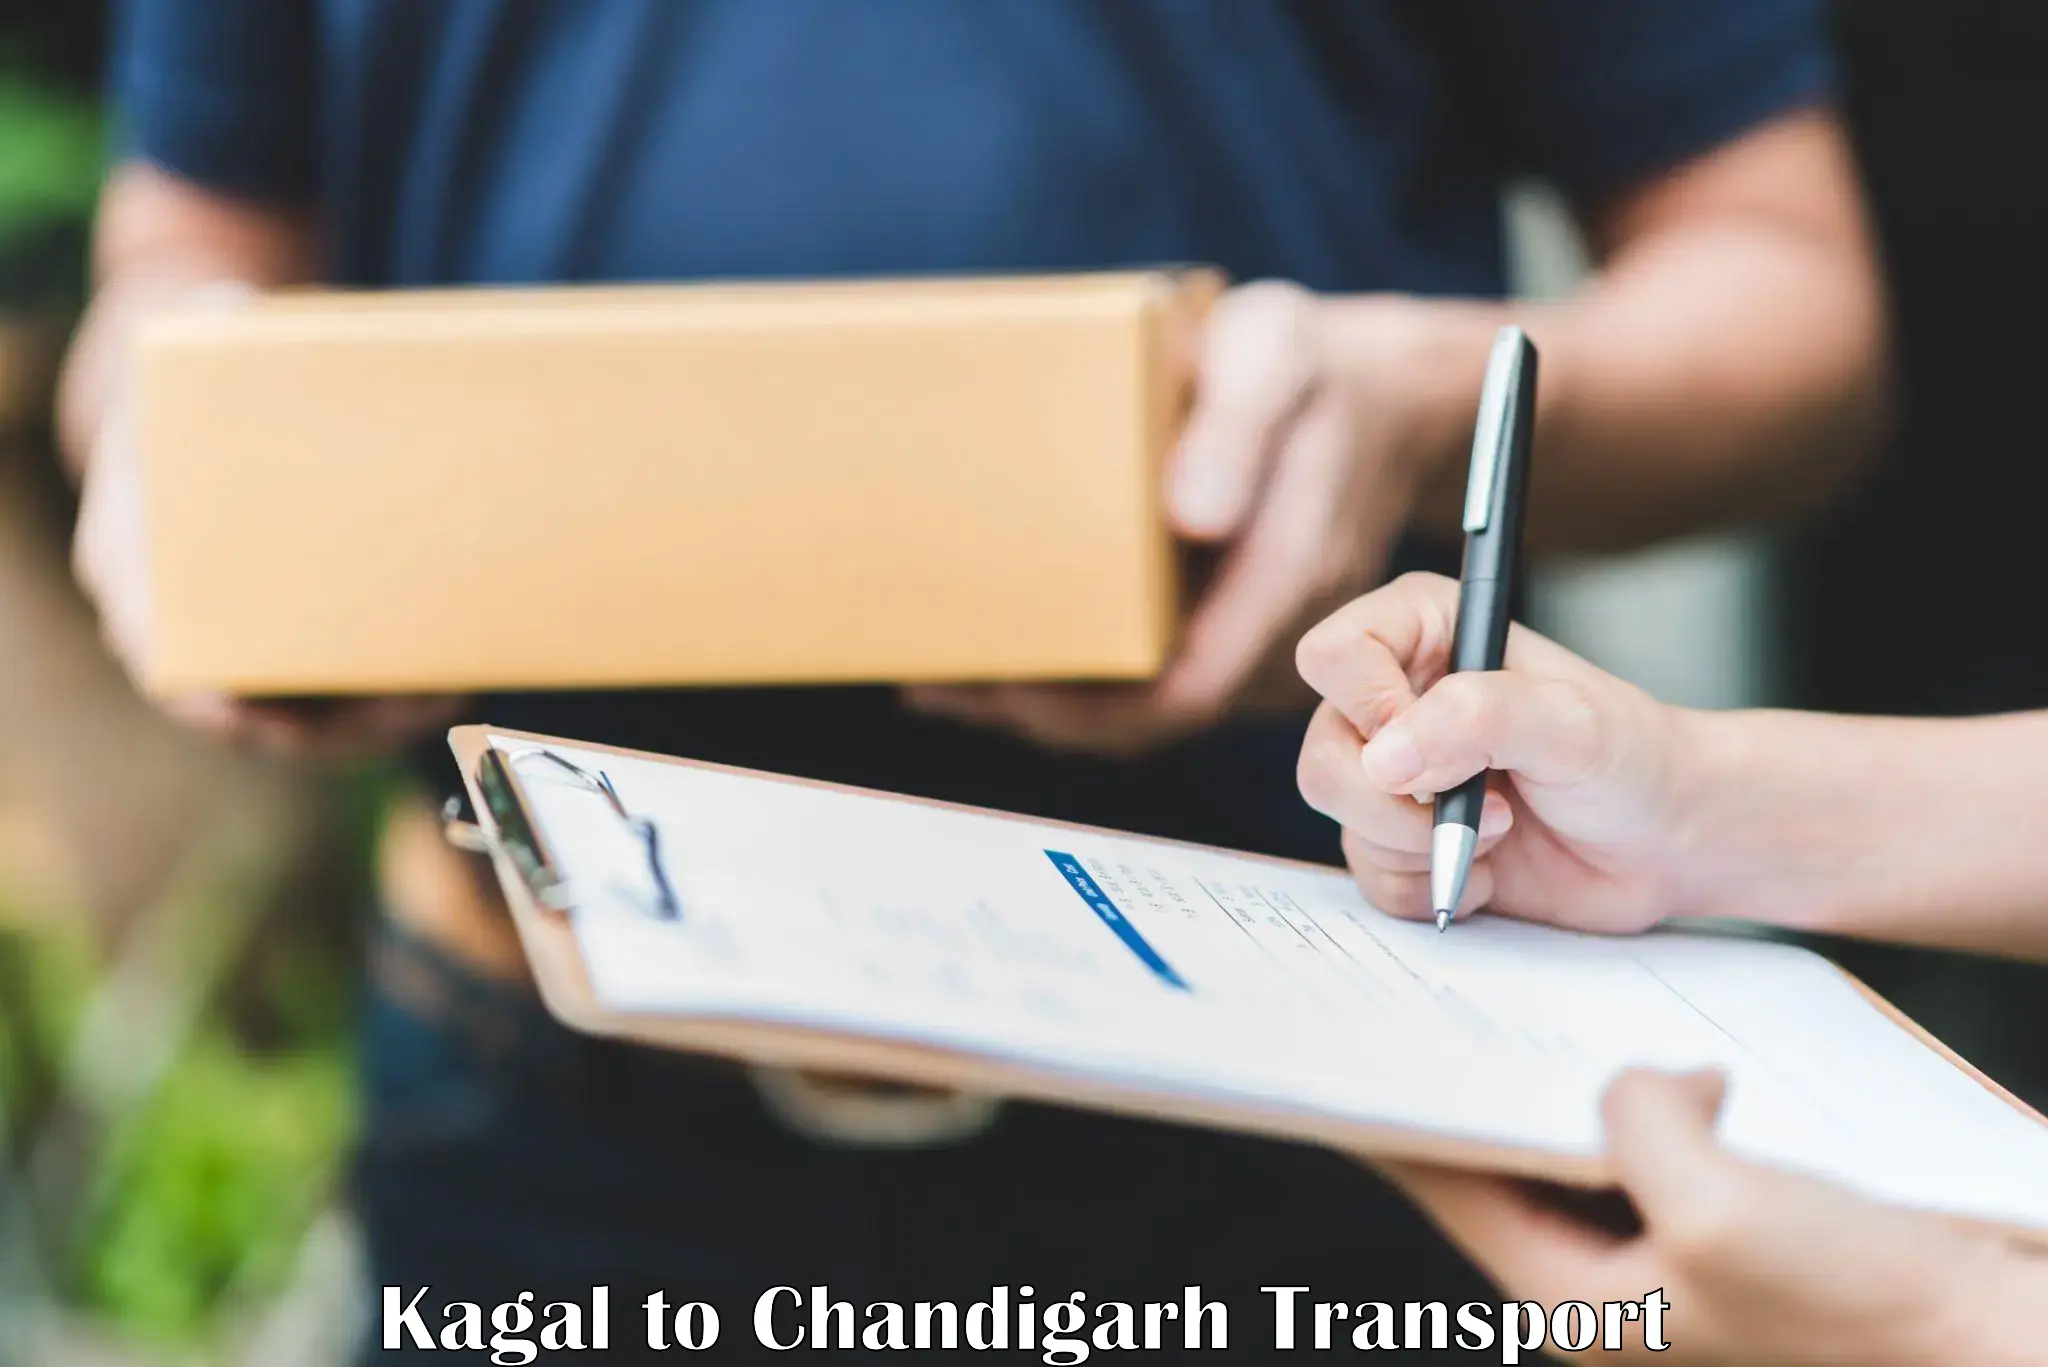 Truck transport companies in India Kagal to Chandigarh